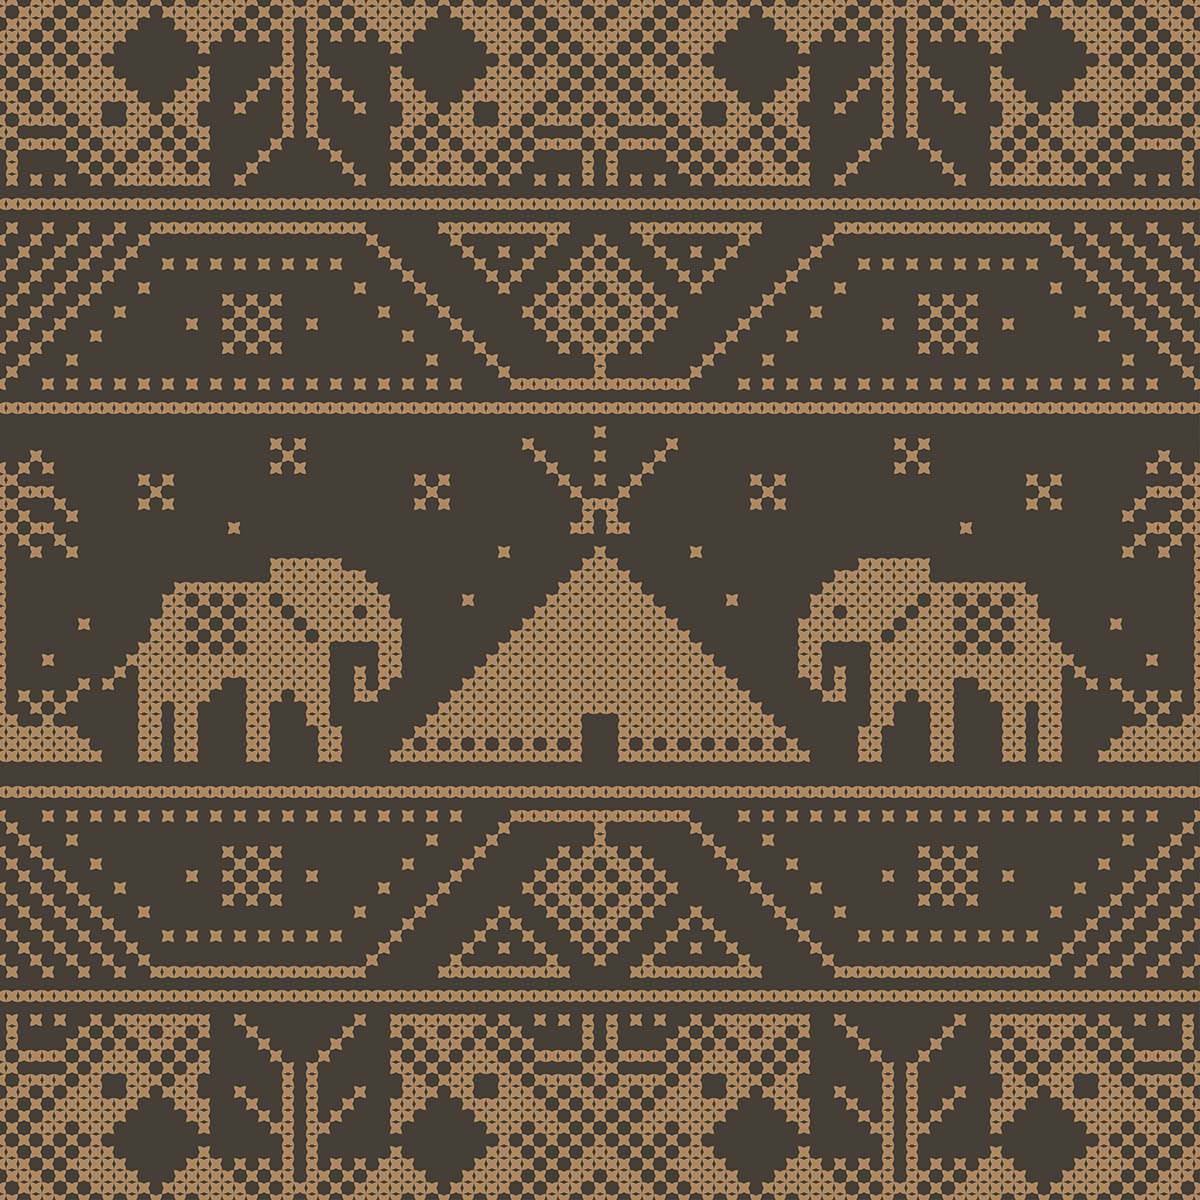 A pattern of elephants and a tent